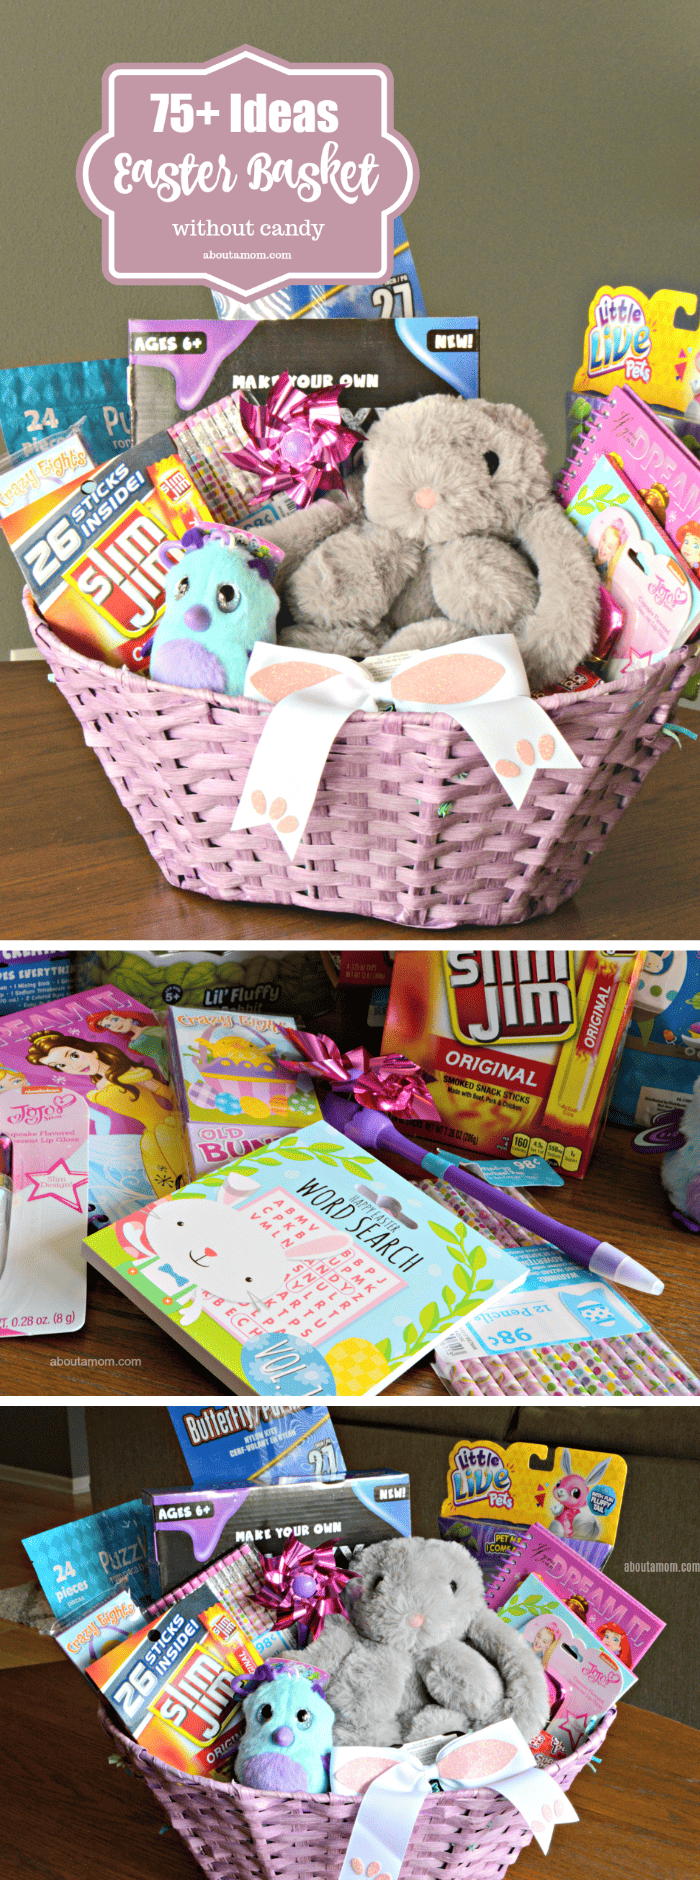 Are you trying to avoid sugar-crazed children this Easter? Here's a list of more than 75 Easter basket ideas without candy. Get ideas for non-candy Easter basket fillers for kids of all ages.